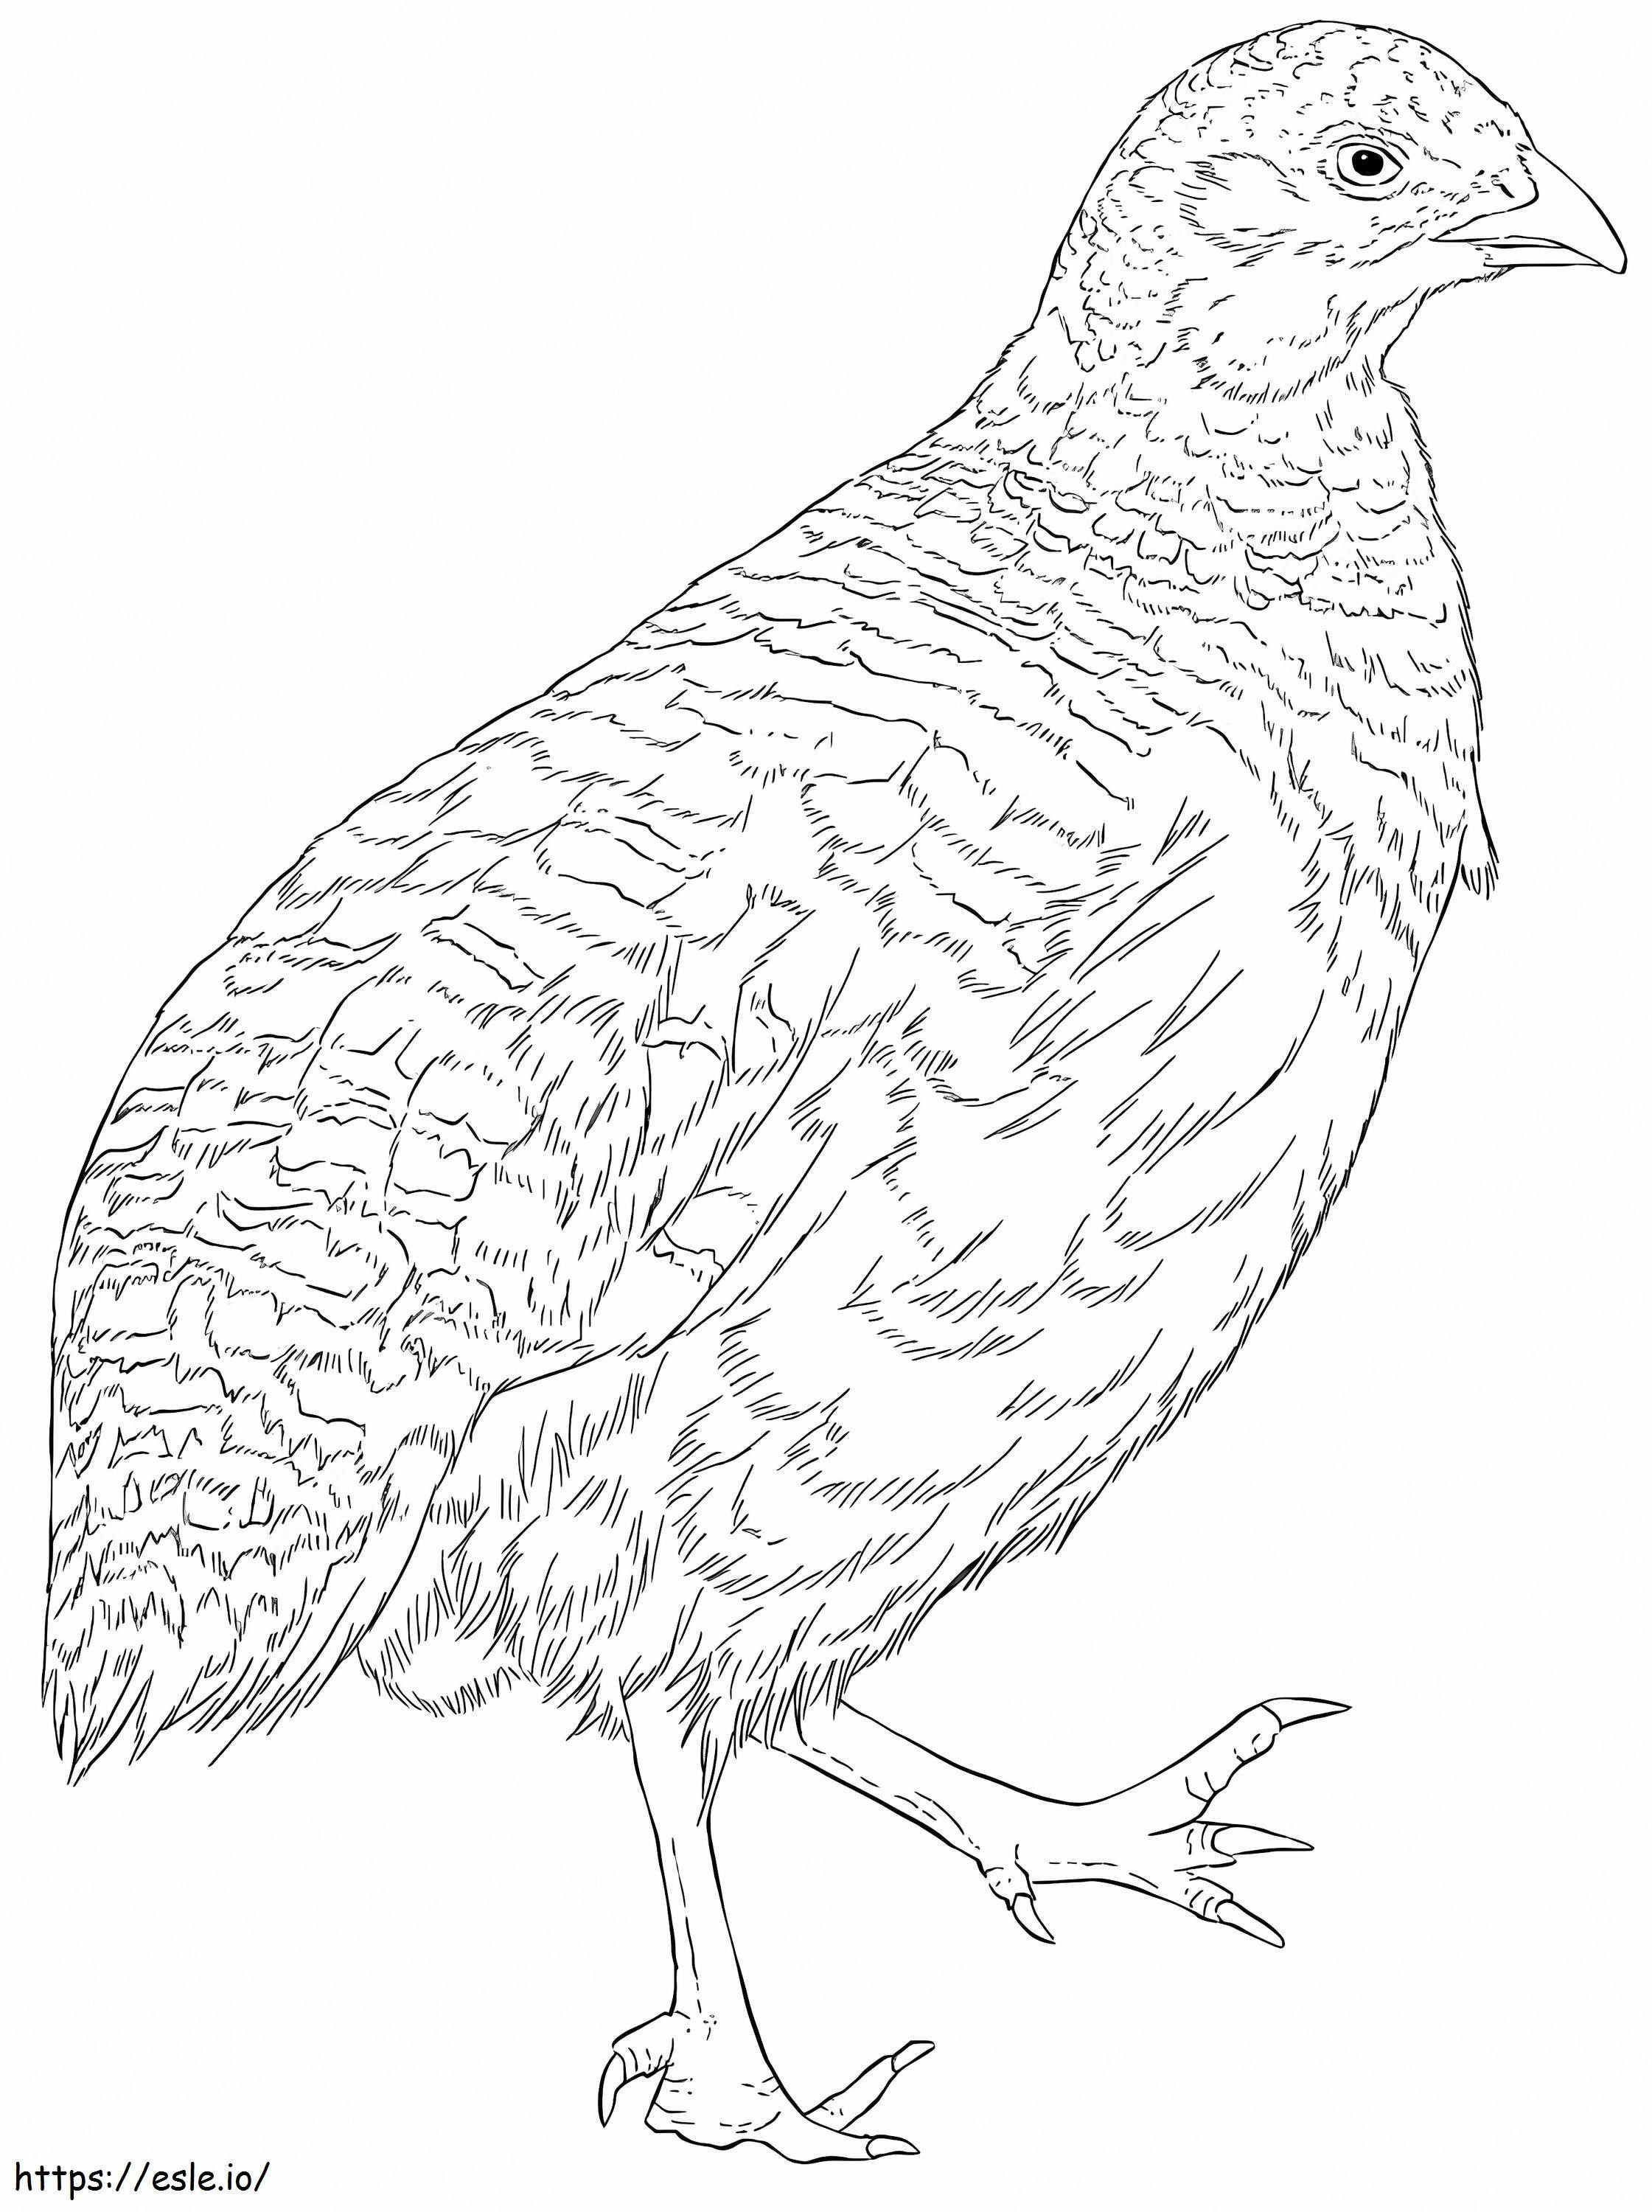 Snow Mountain Quail coloring page